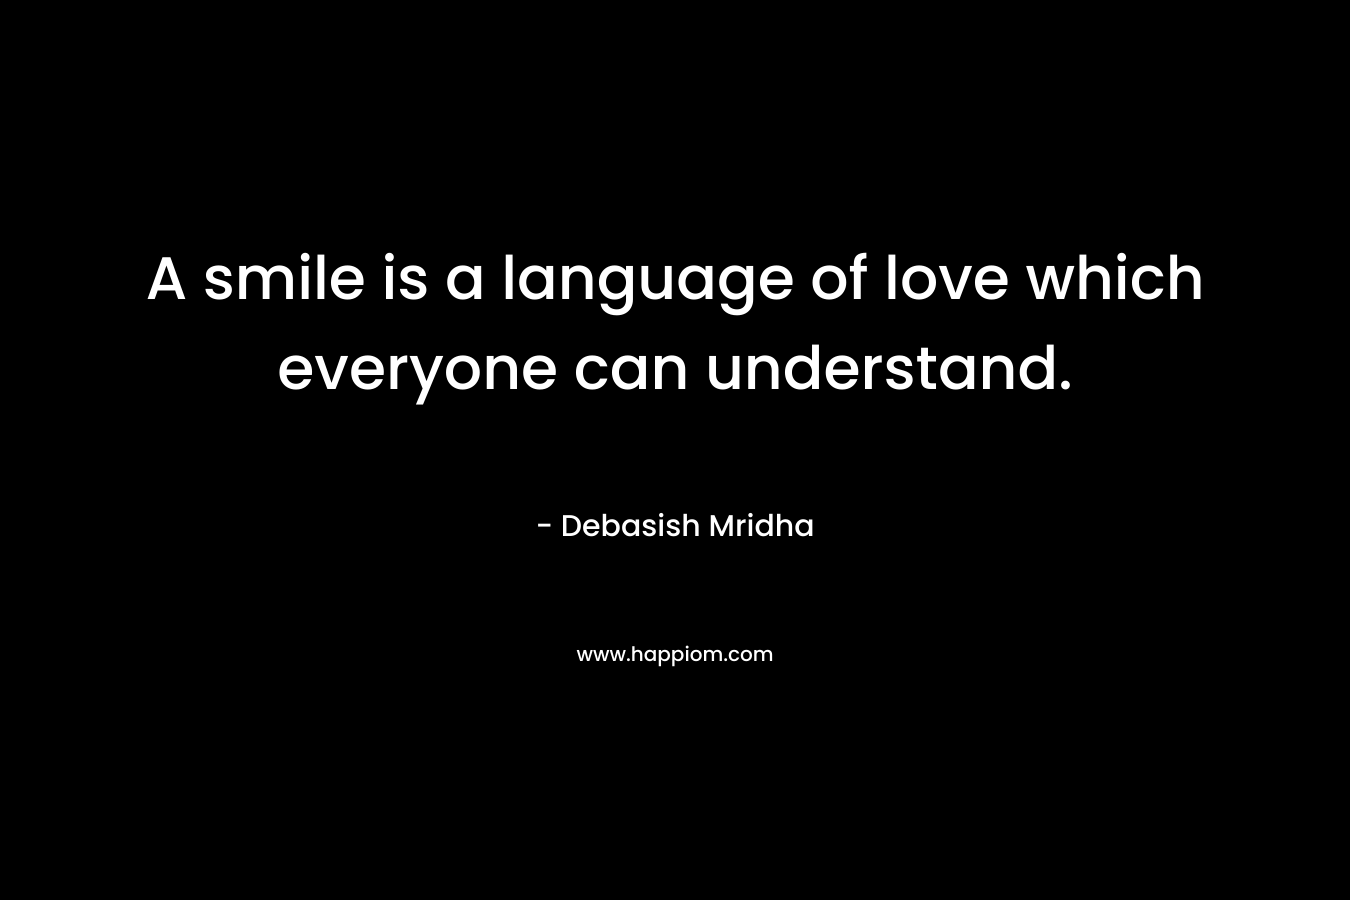 A smile is a language of love which everyone can understand.